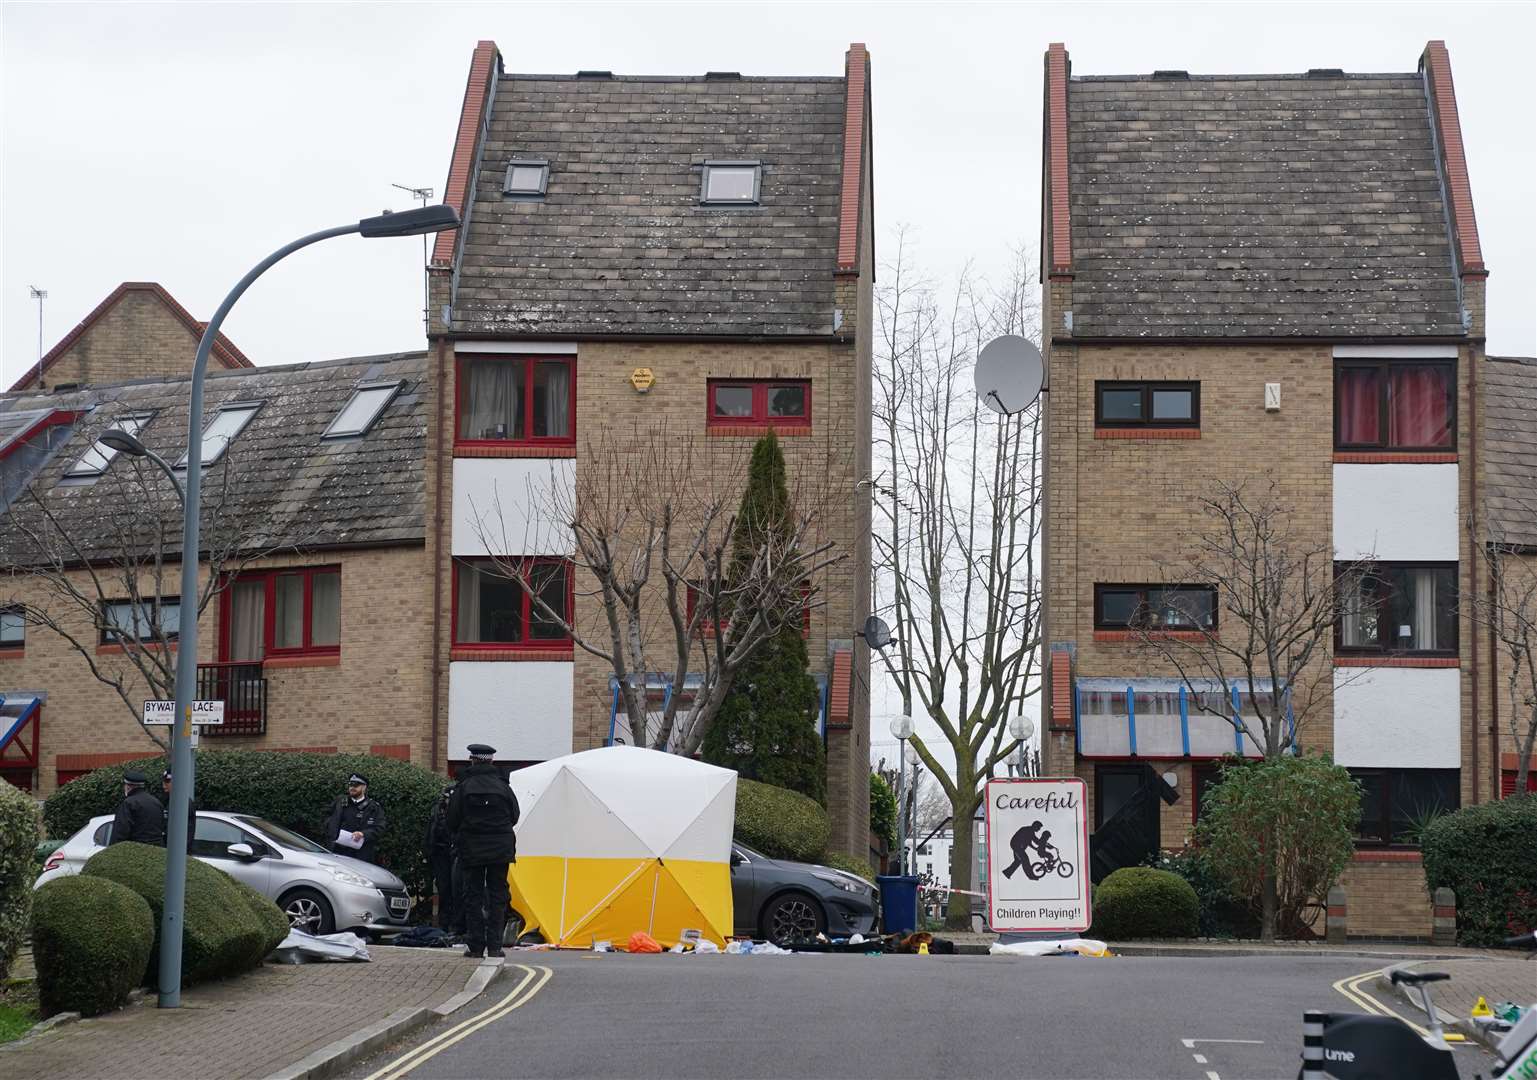 Police at the scene near Bywater Place in Surrey Quays, south-east London (Lucy North/PA)